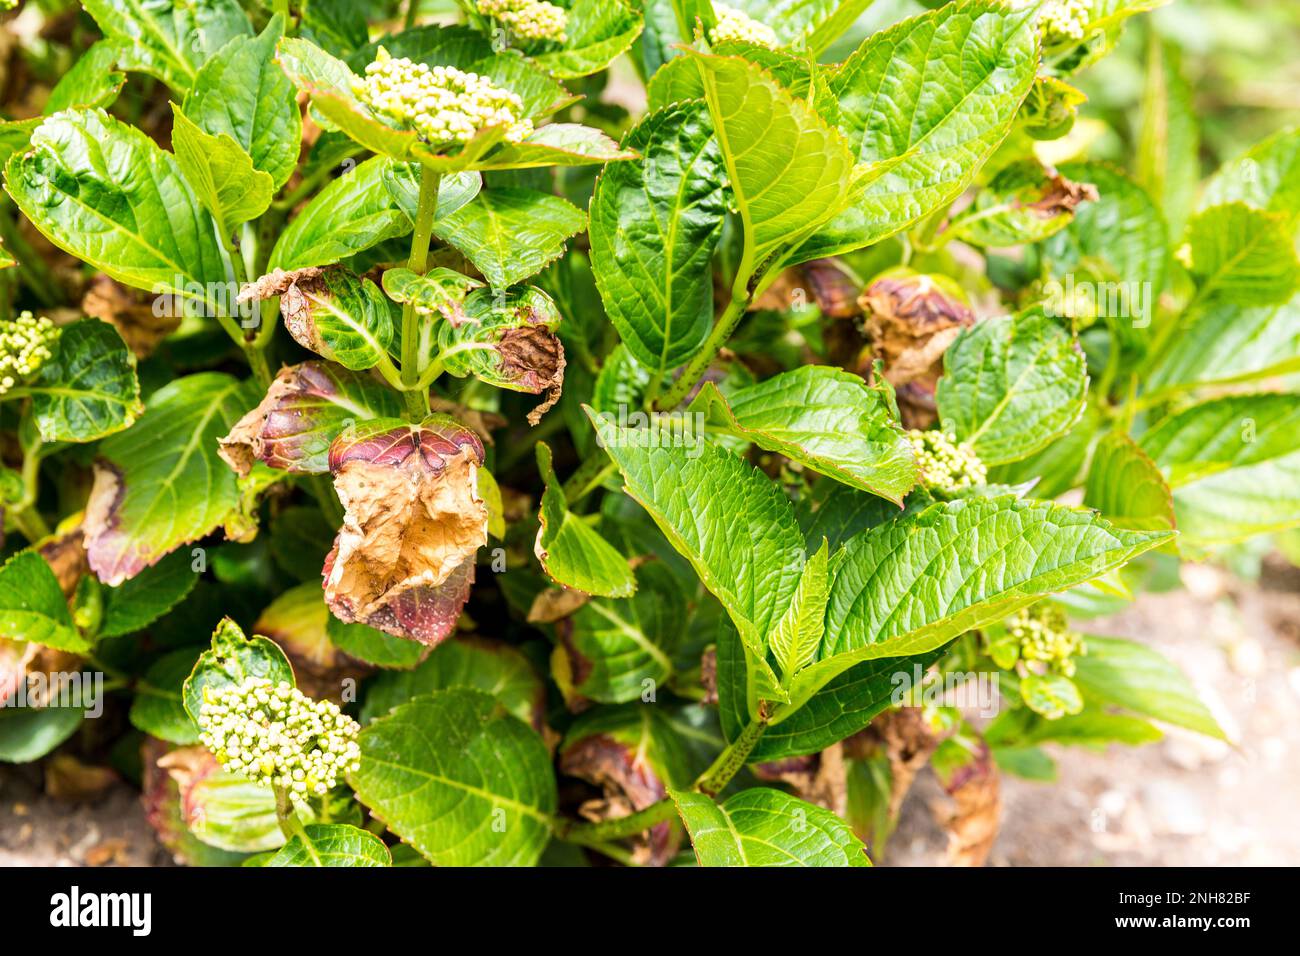 Close-up leave of hortensia infected by cercospora in garden. Tan spots with reddish bown halos develop on leaves. Need water to keep off moisture. Ap Stock Photo